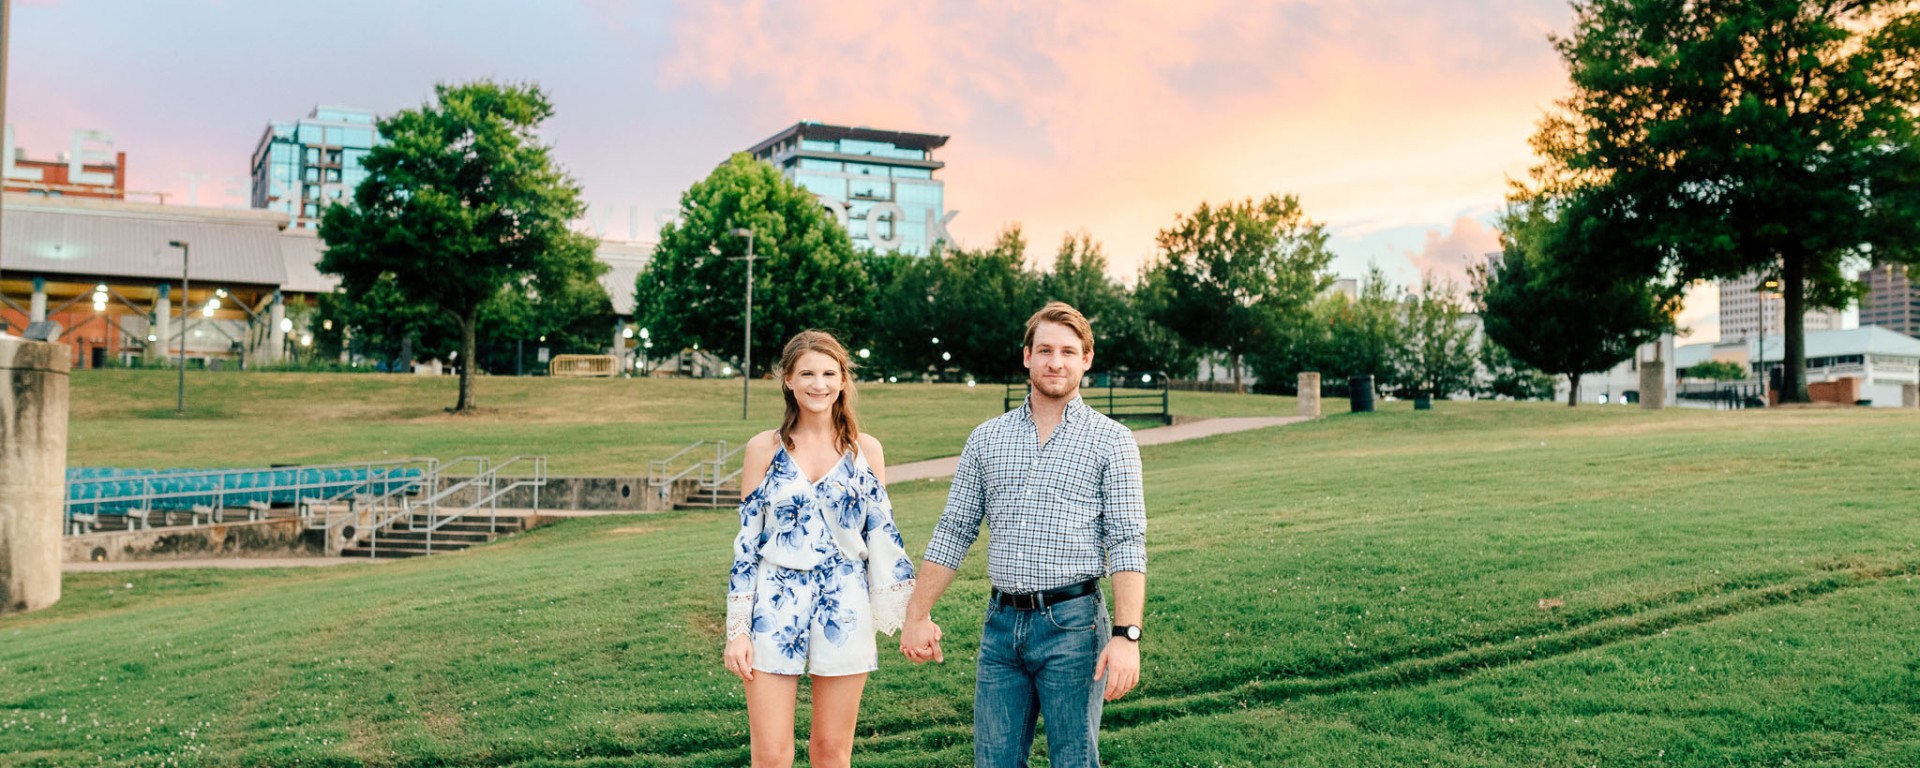 Tips for Engagement Photos